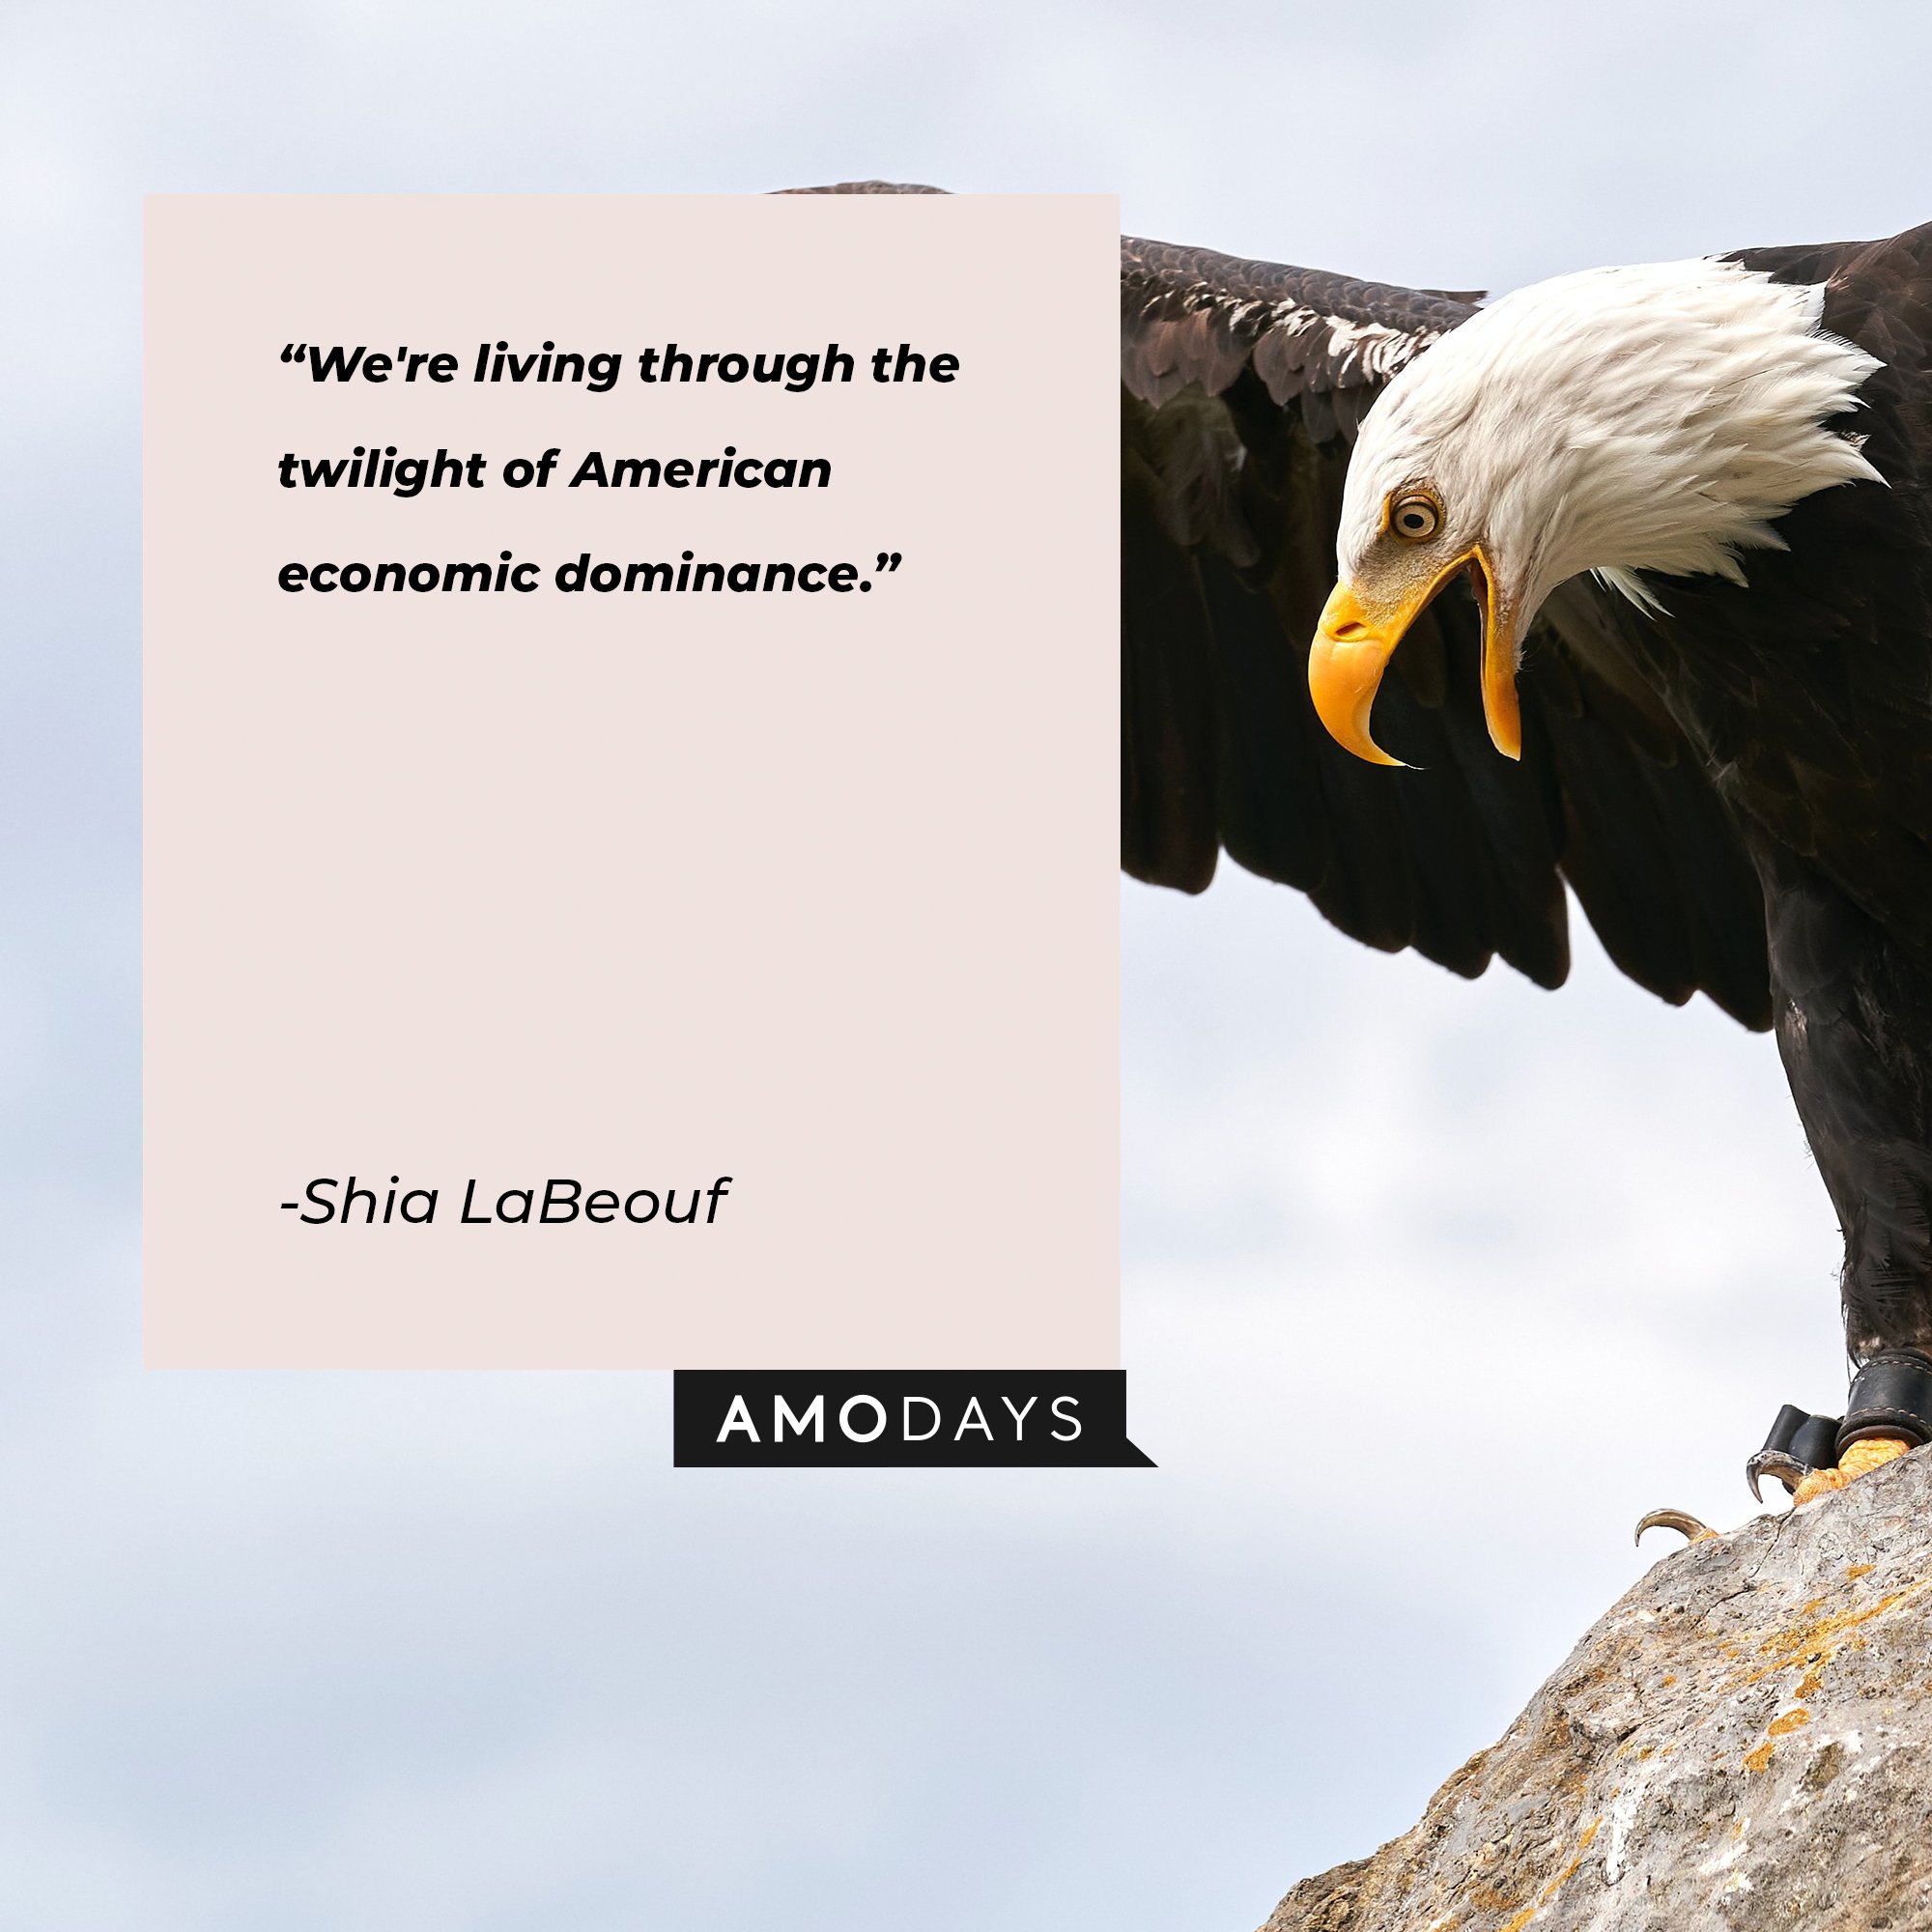 Shia LaBeouf’s quote: “We're living through the twilight of American economic dominance." | Image: AmoDays